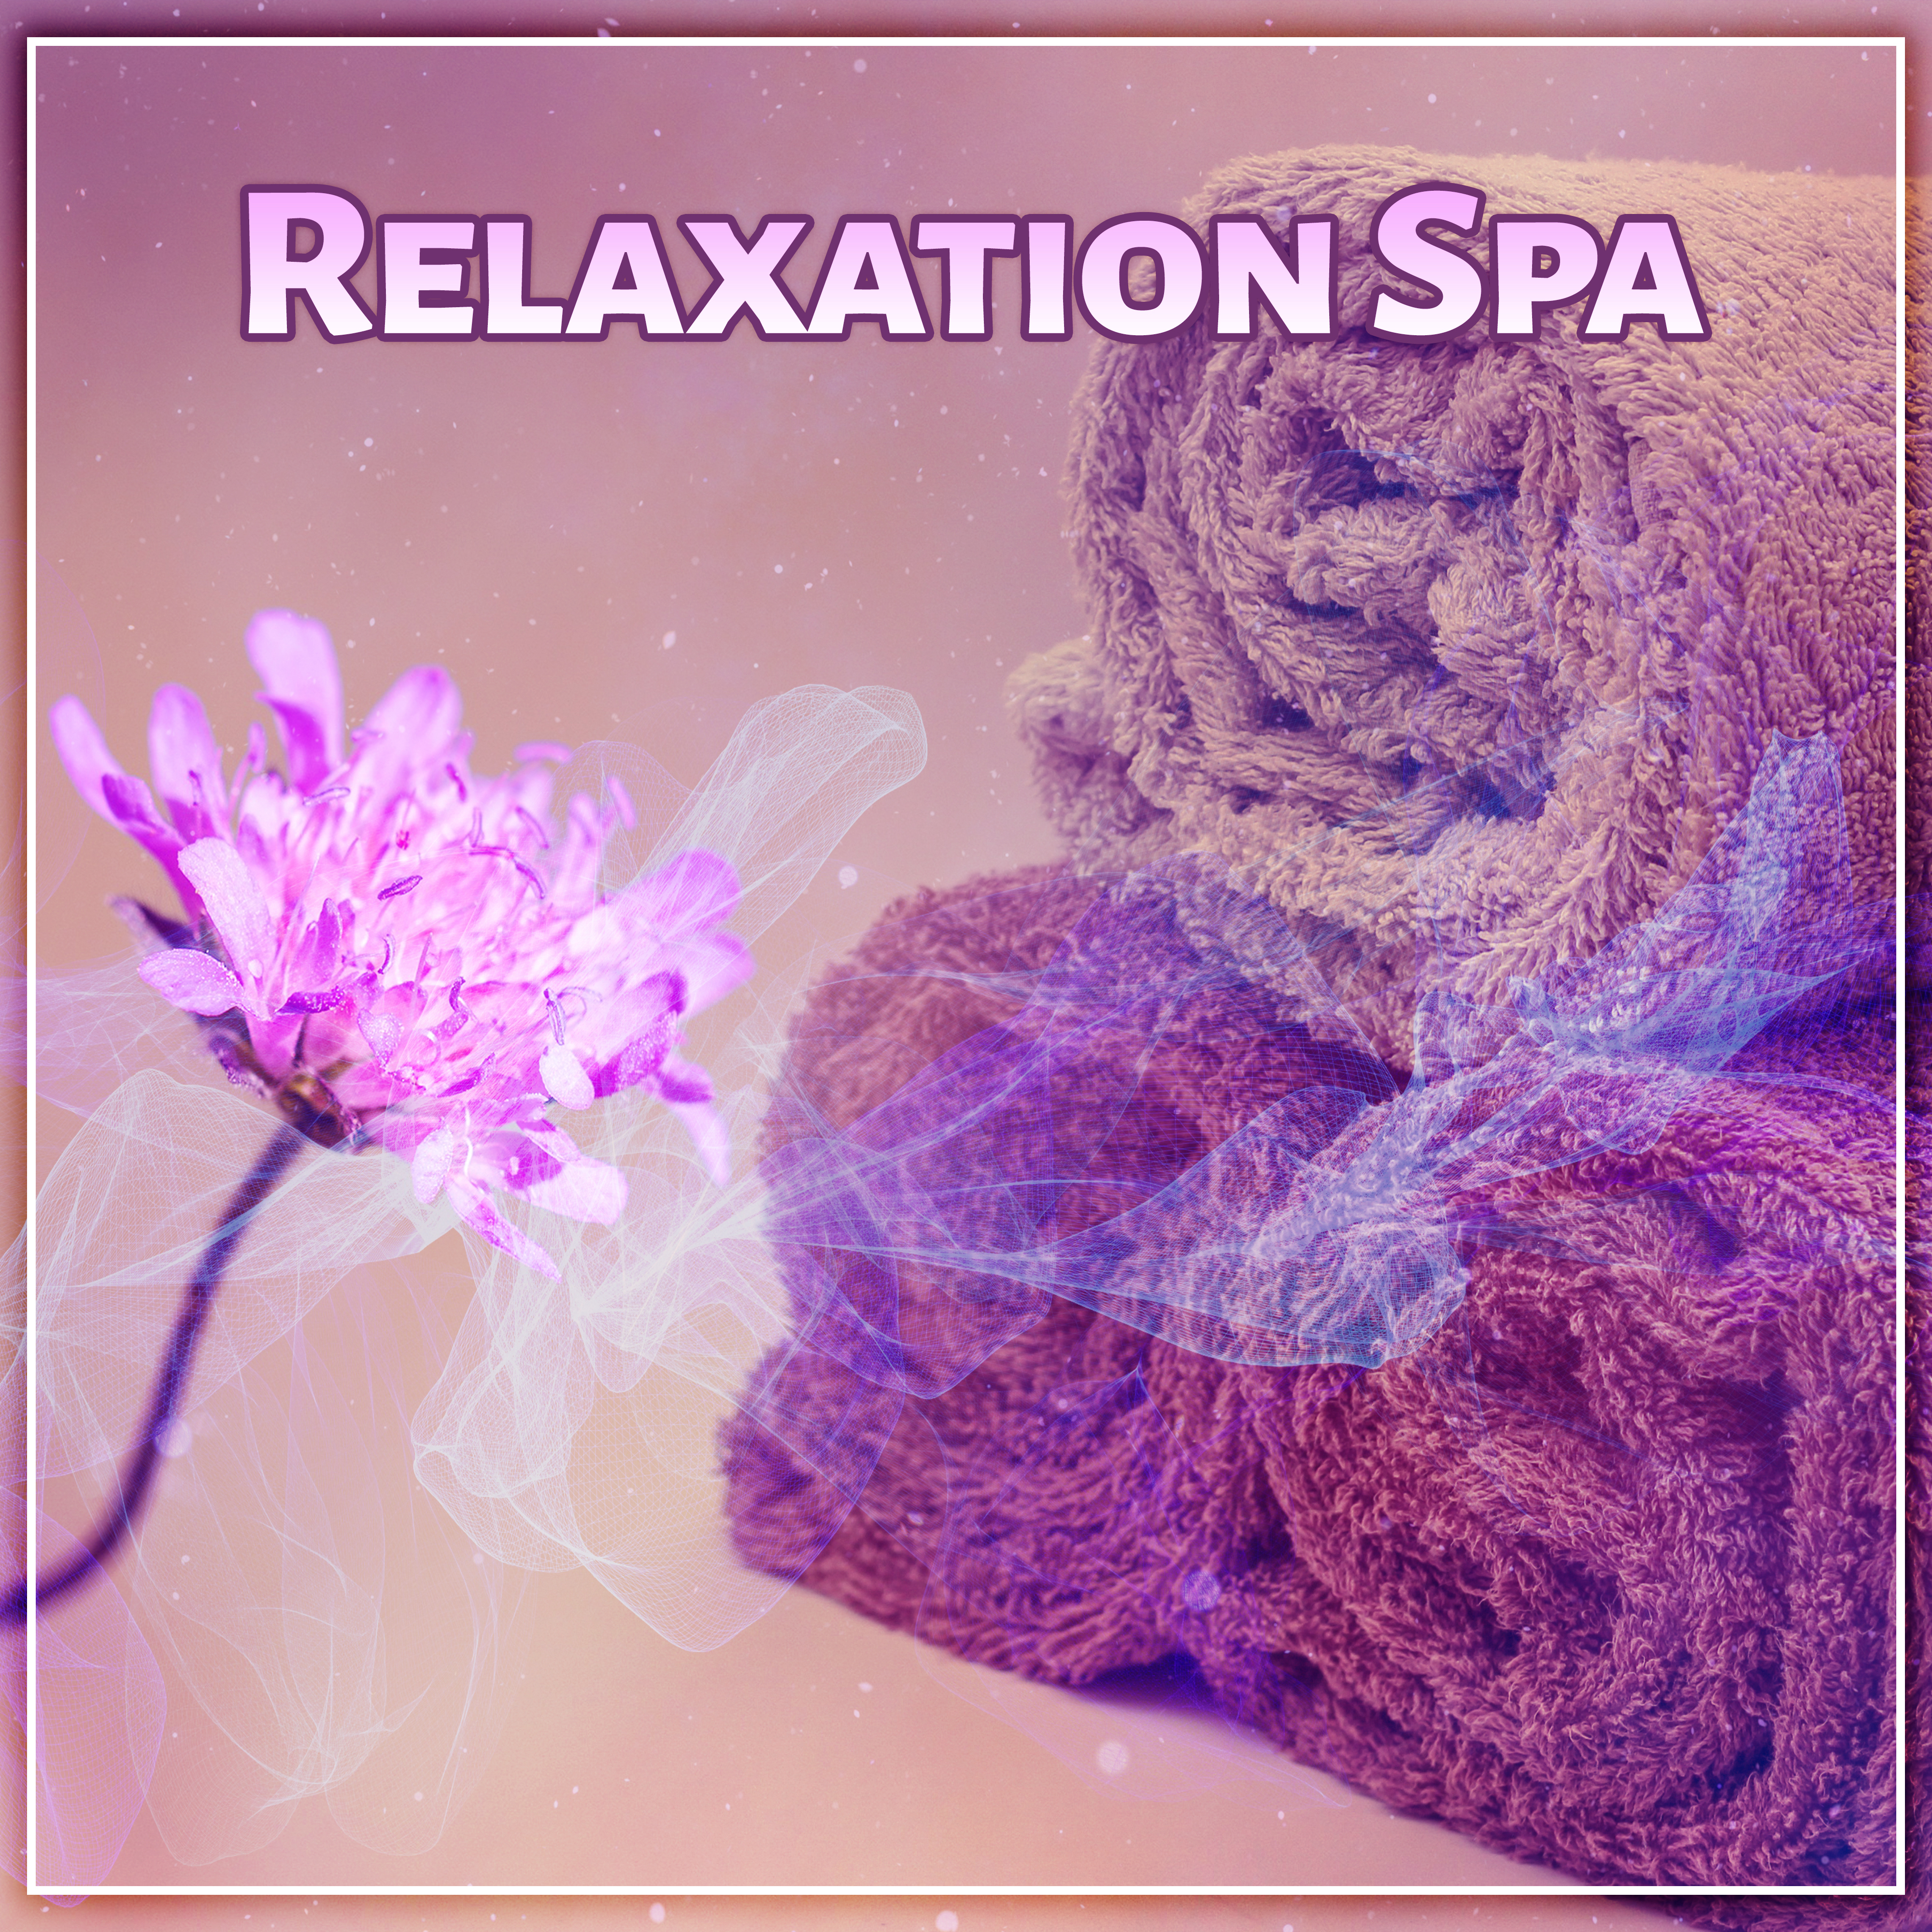 Relaxation Spa  Nature Sounds After Work, Deep Sleep, Peaceful Mind, Meditation Spa, Sounds of Birds, Fresh Air